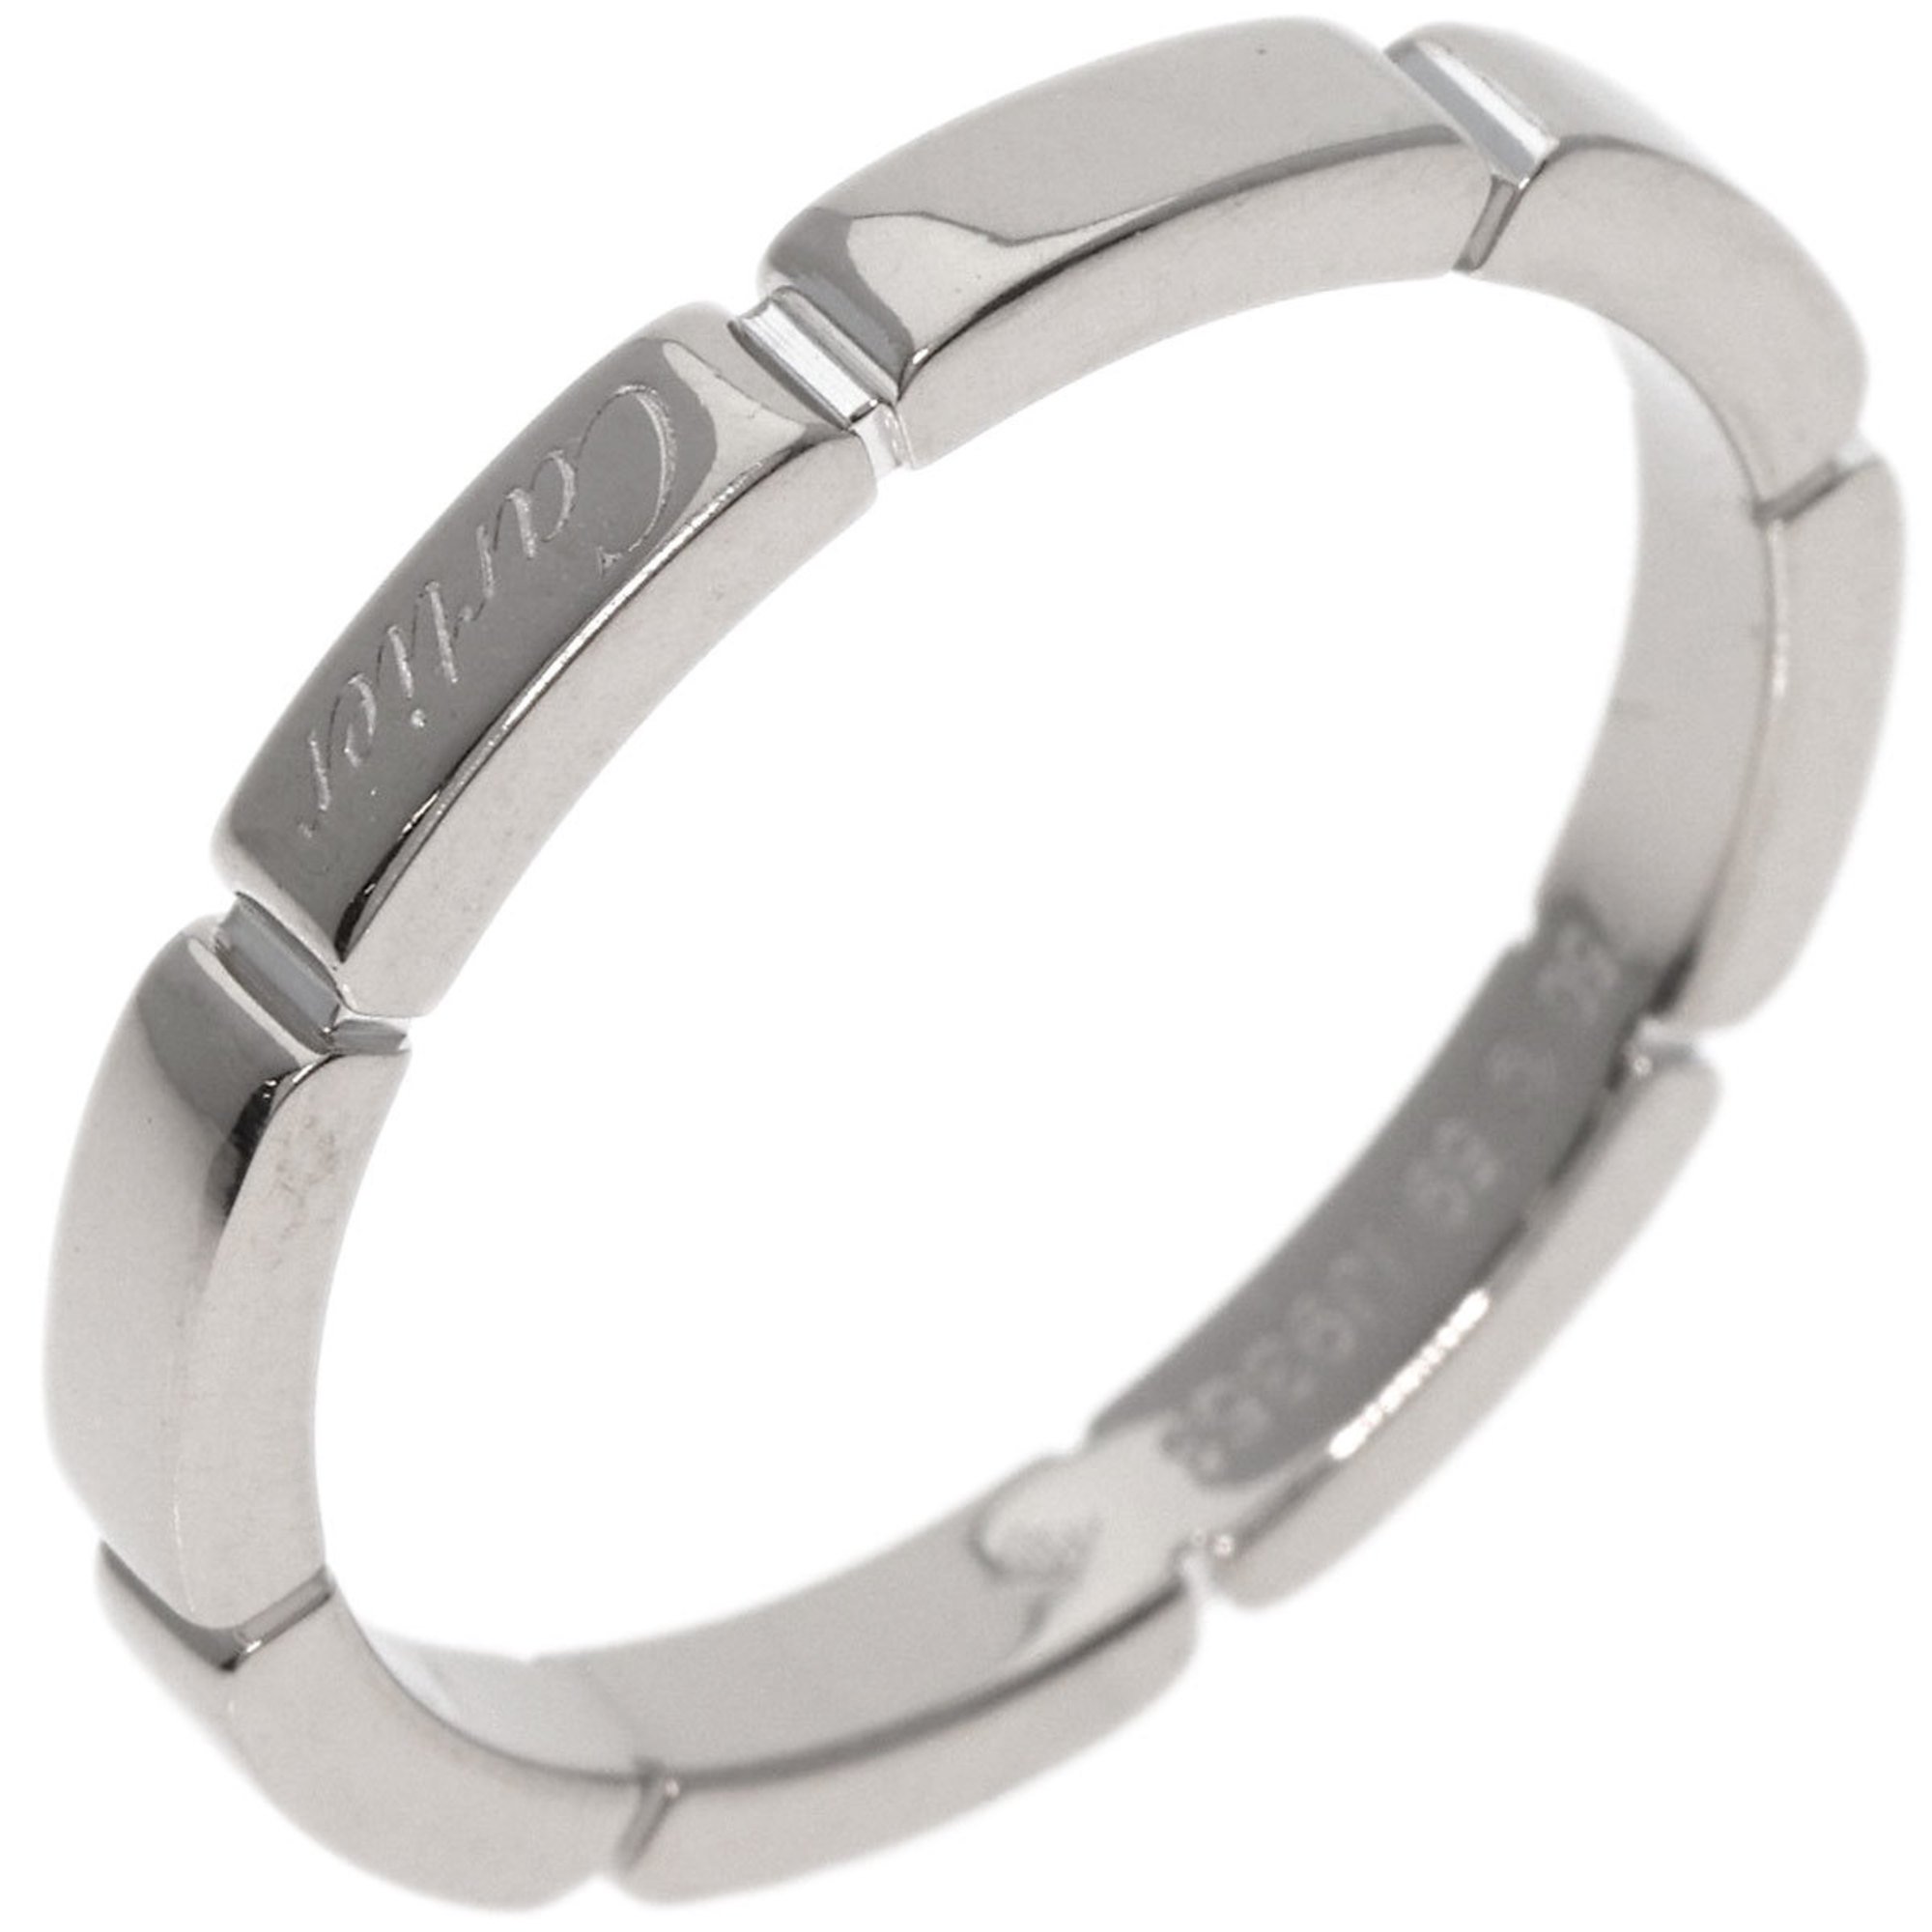 Cartier Maillon Panthere #59 Ring, 18K White Gold, Women's, CARTIER